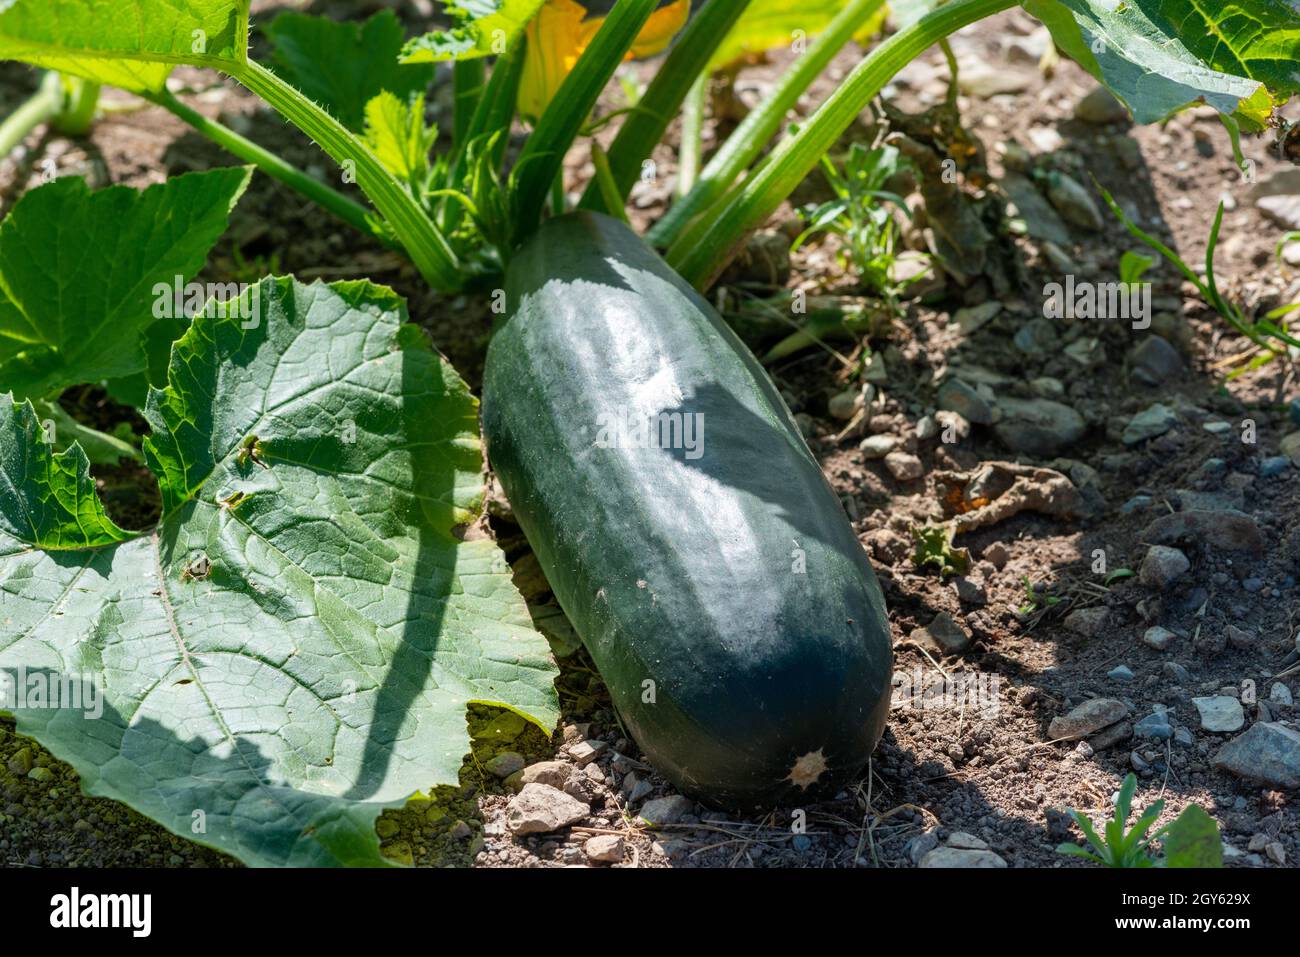 A large raw green oblong marrow zucchini vegetable growing on the ground with large leaves and tall stems.The fresh colorful organic crop is thick. Stock Photo